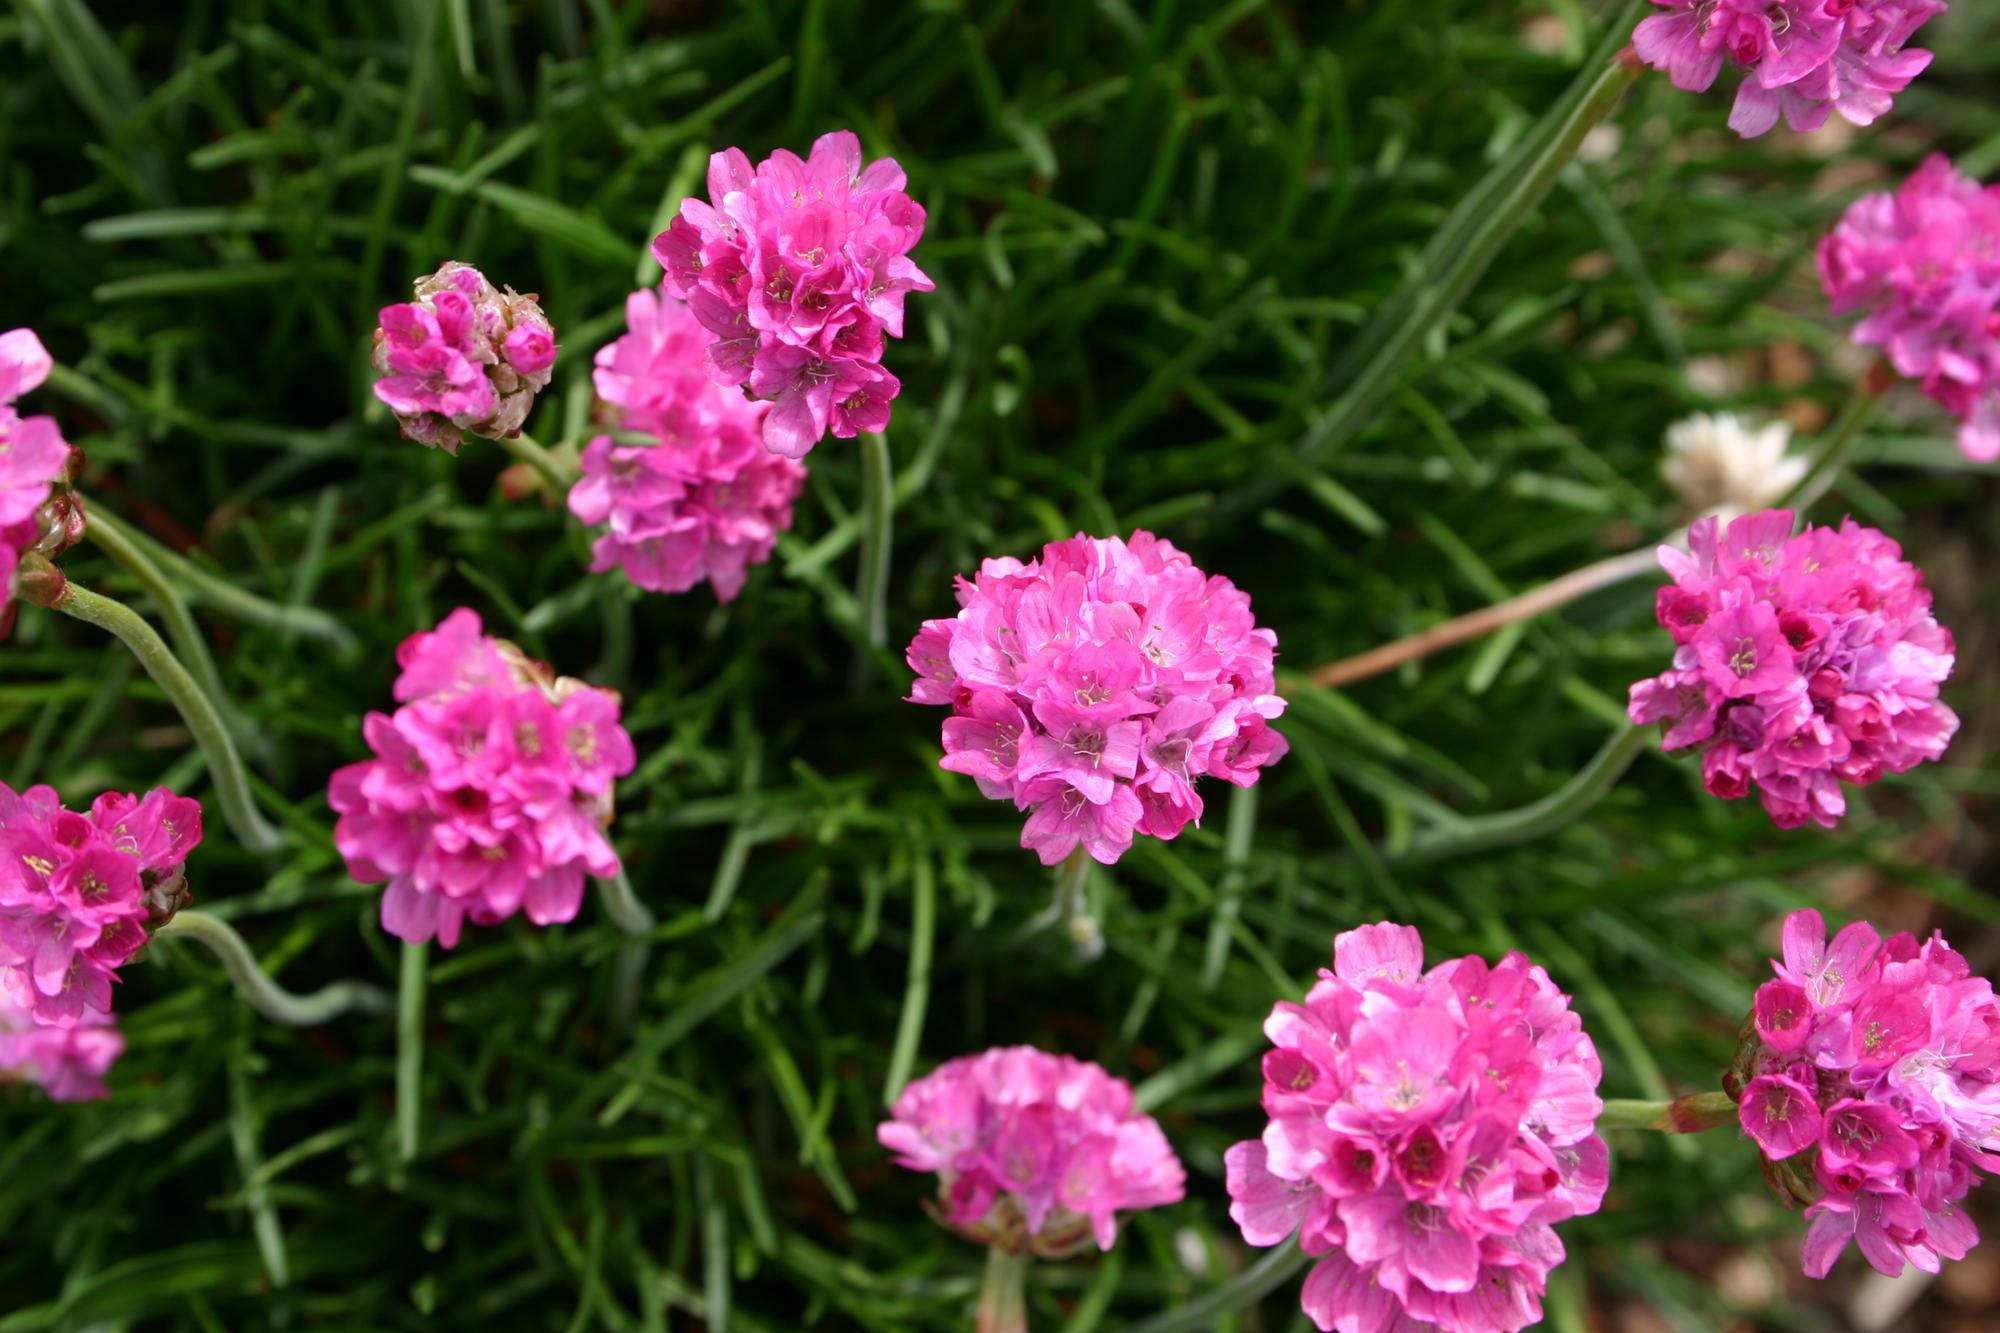 A close-up of pink sea thrift blooms.